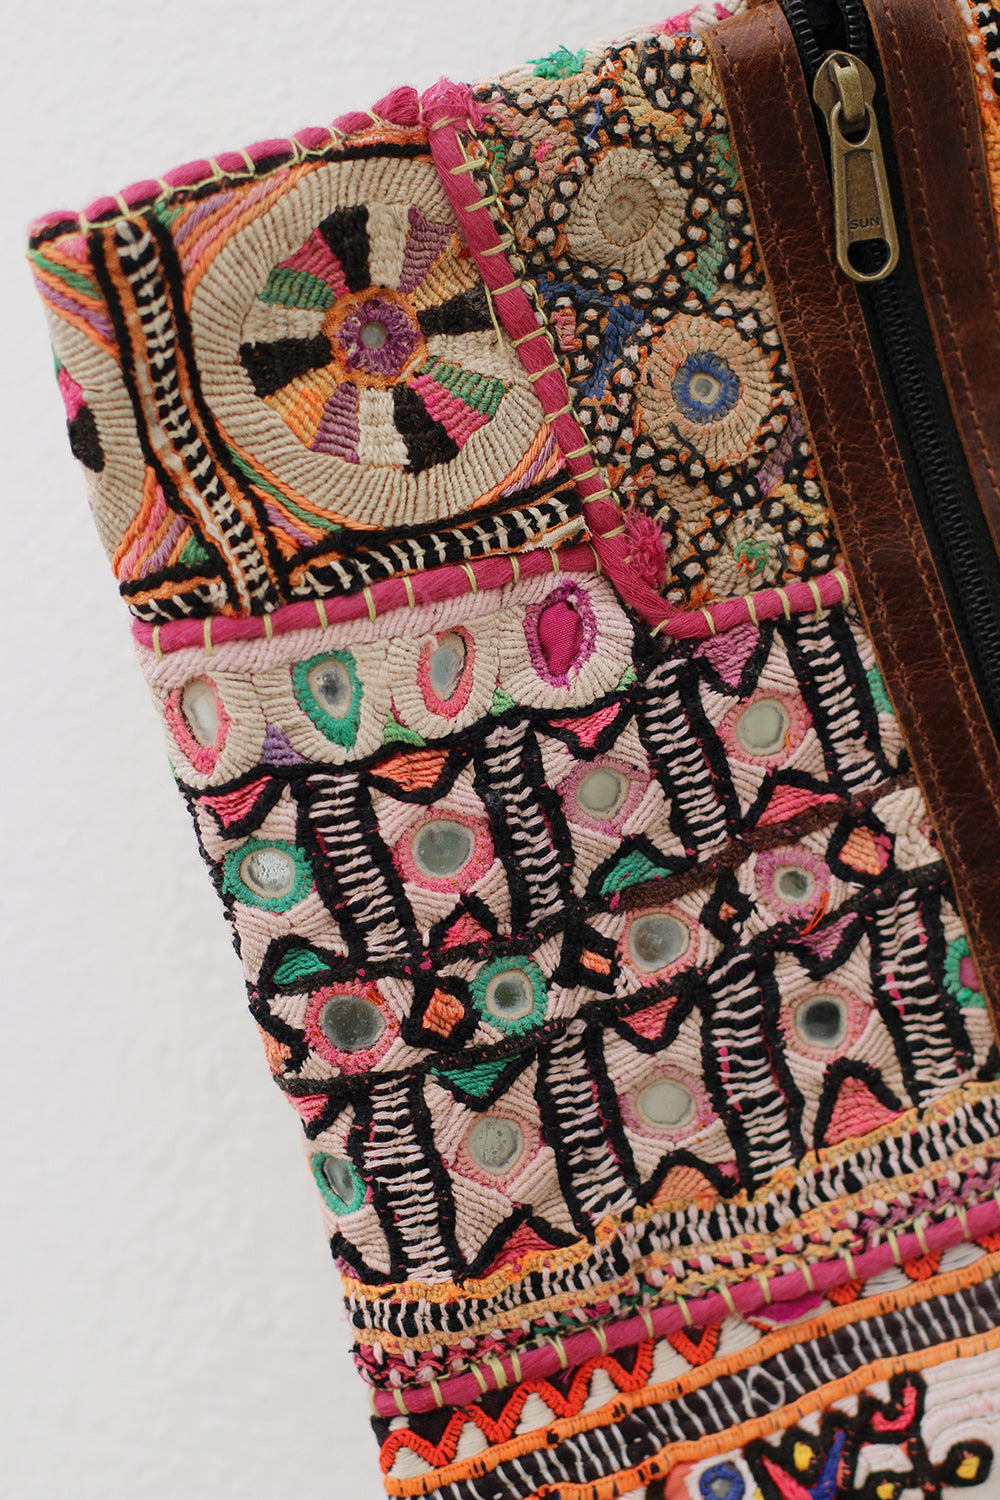 Boho Chic Vintage Embroidered Clutch Bag with Leather Strap